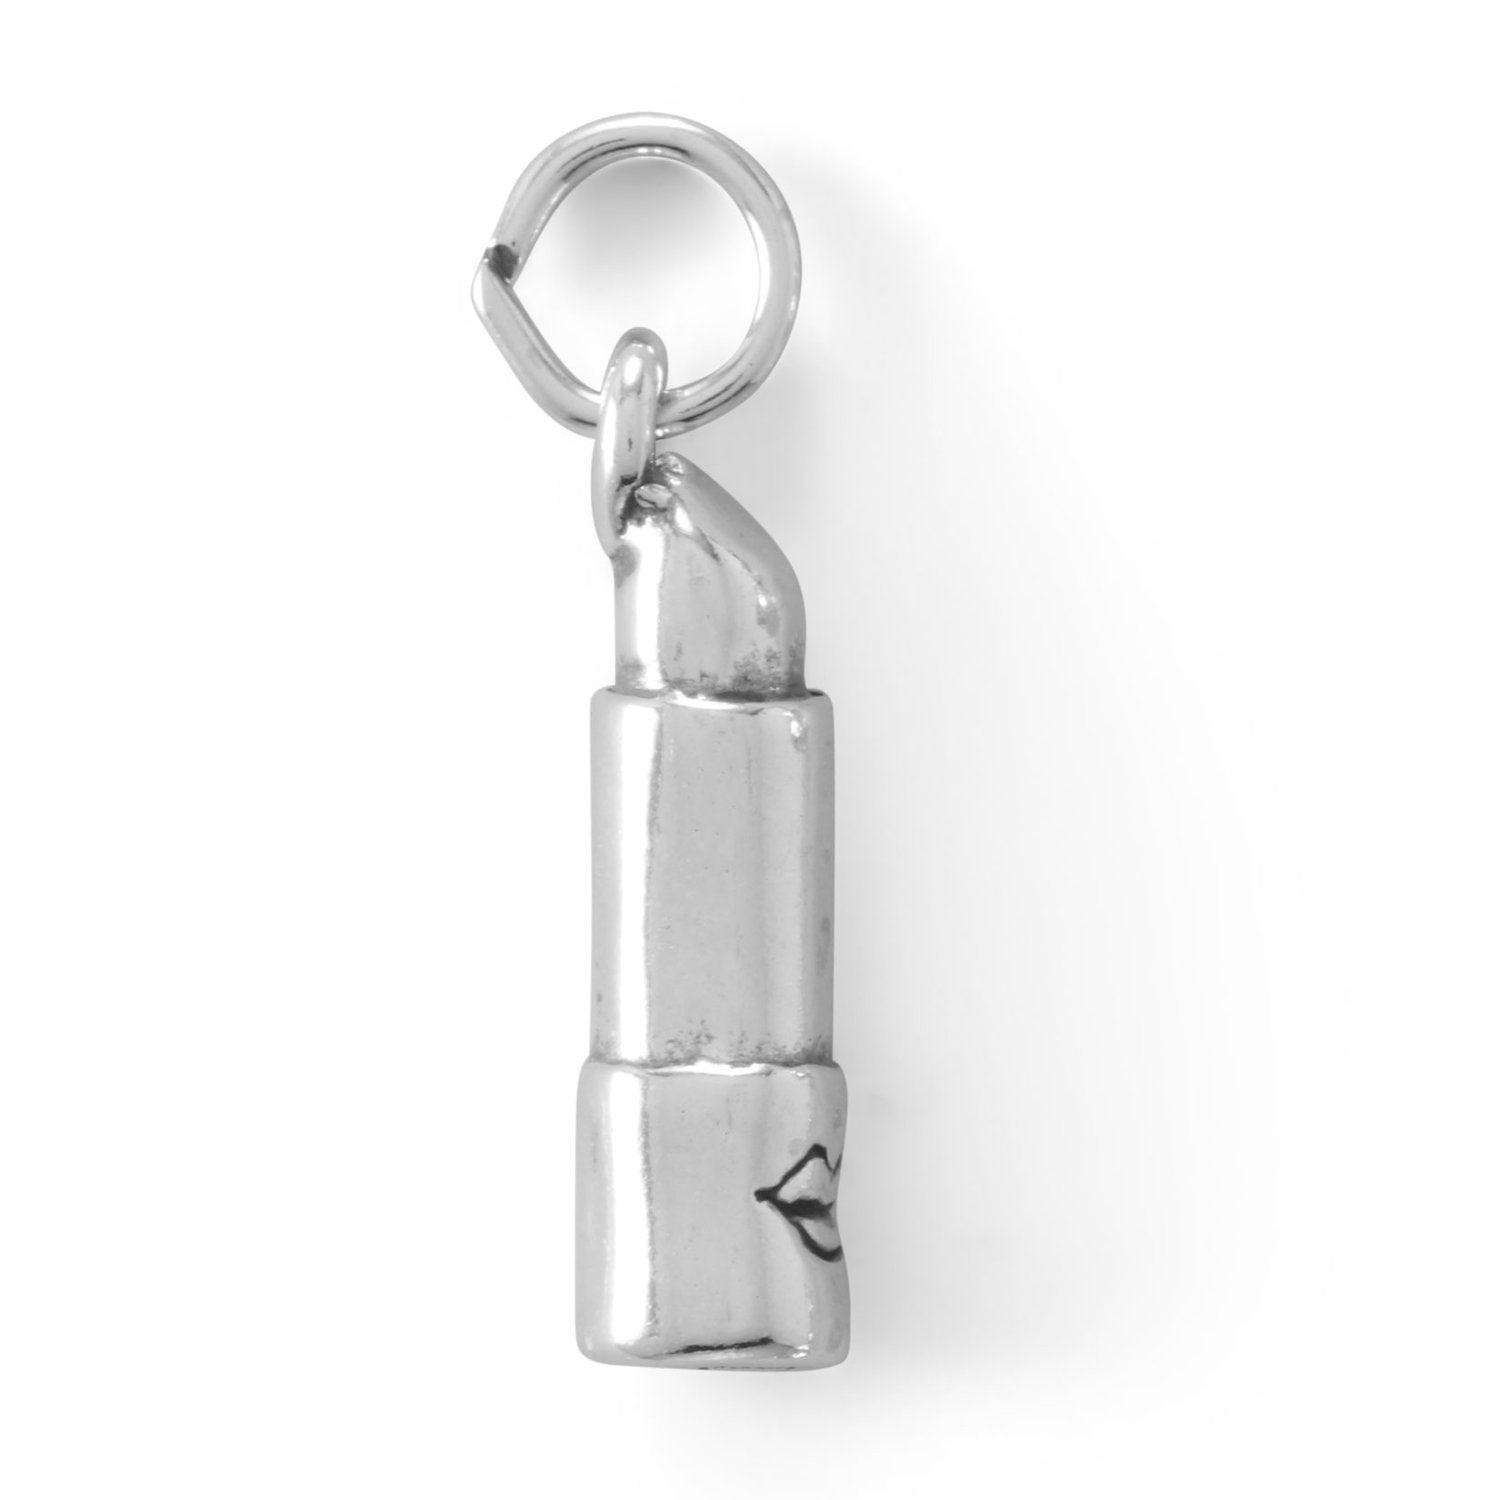 Sealed With A Kiss! Lipstick Charm freeshipping - Higher Class Elegance